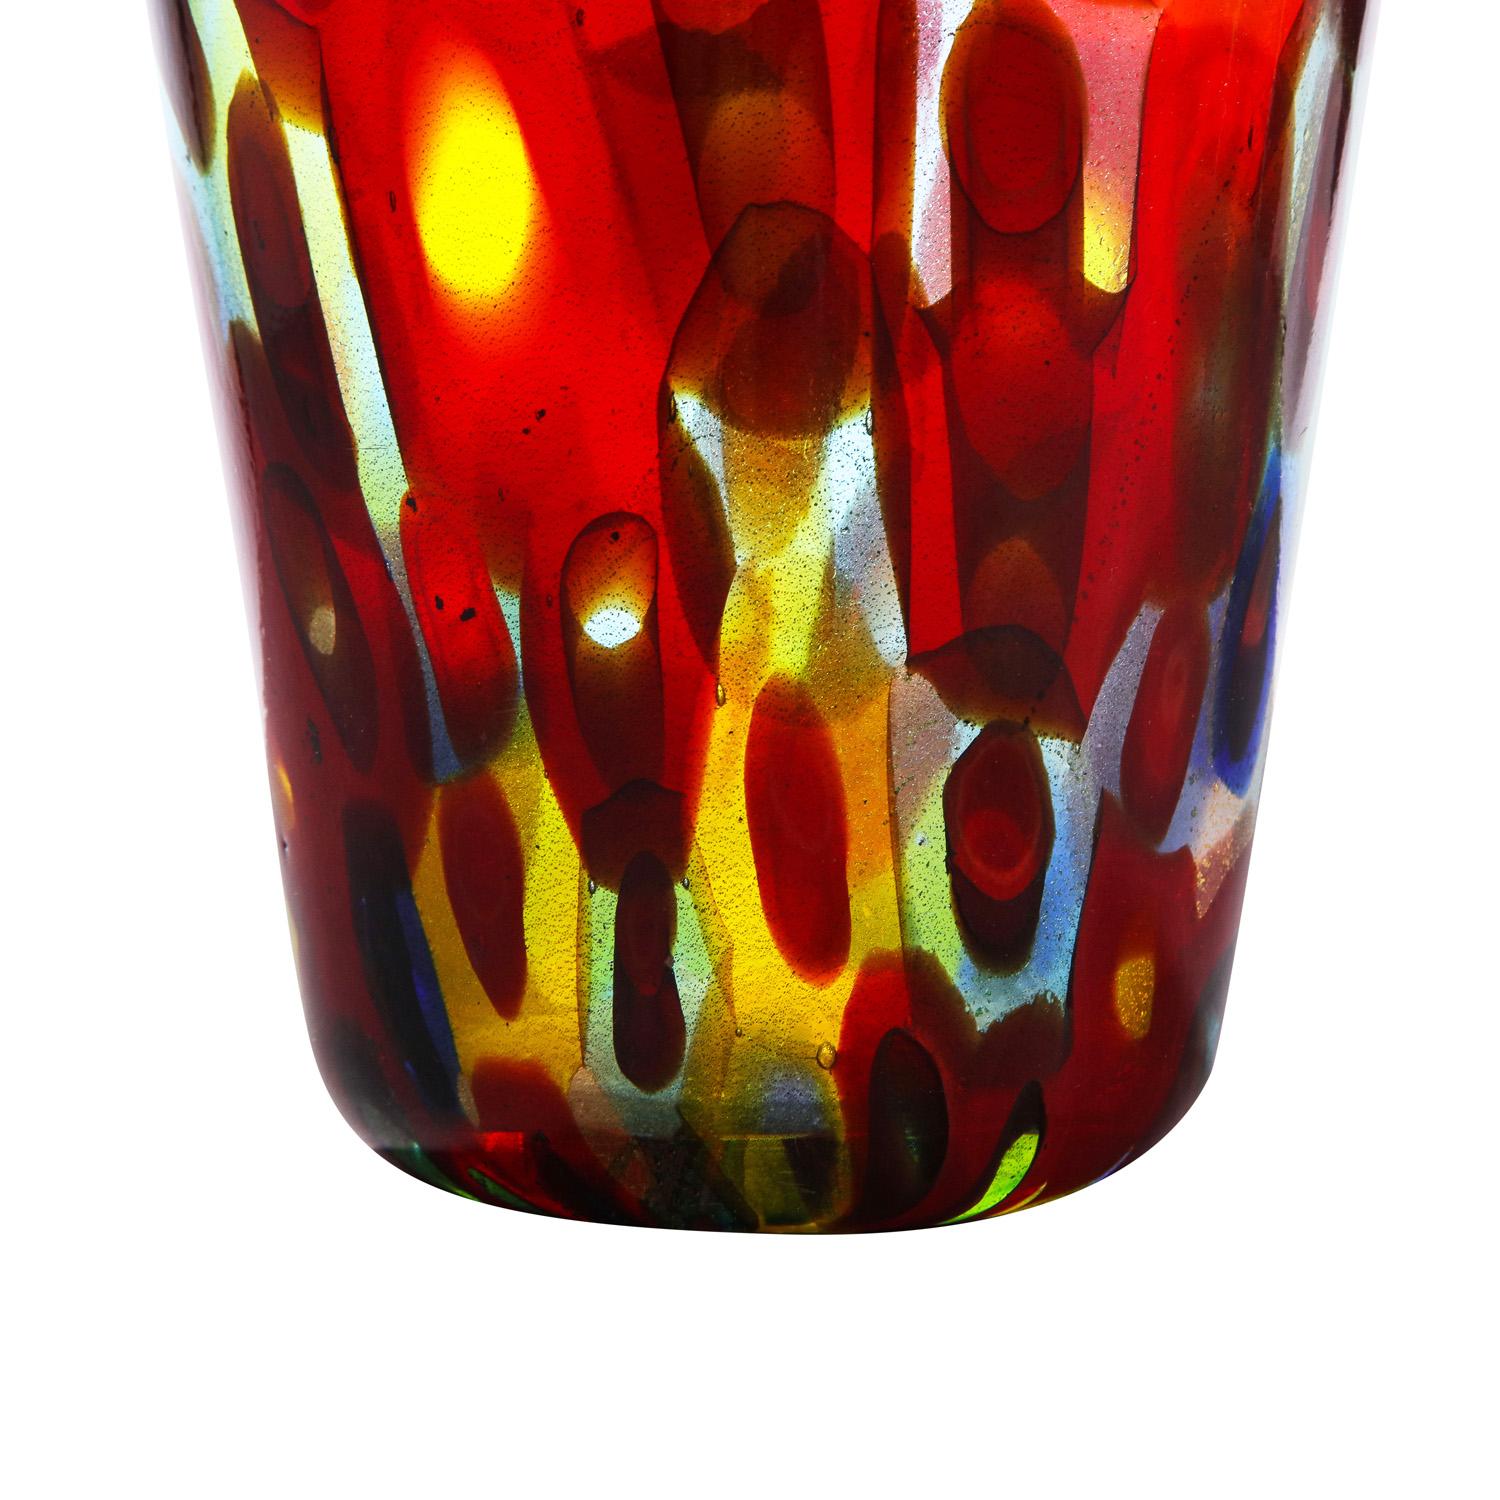 Hand-Crafted Handblown Glass Vase with Large Murrhines by Anzolo Fuga for A.V.E.M, 1950s For Sale